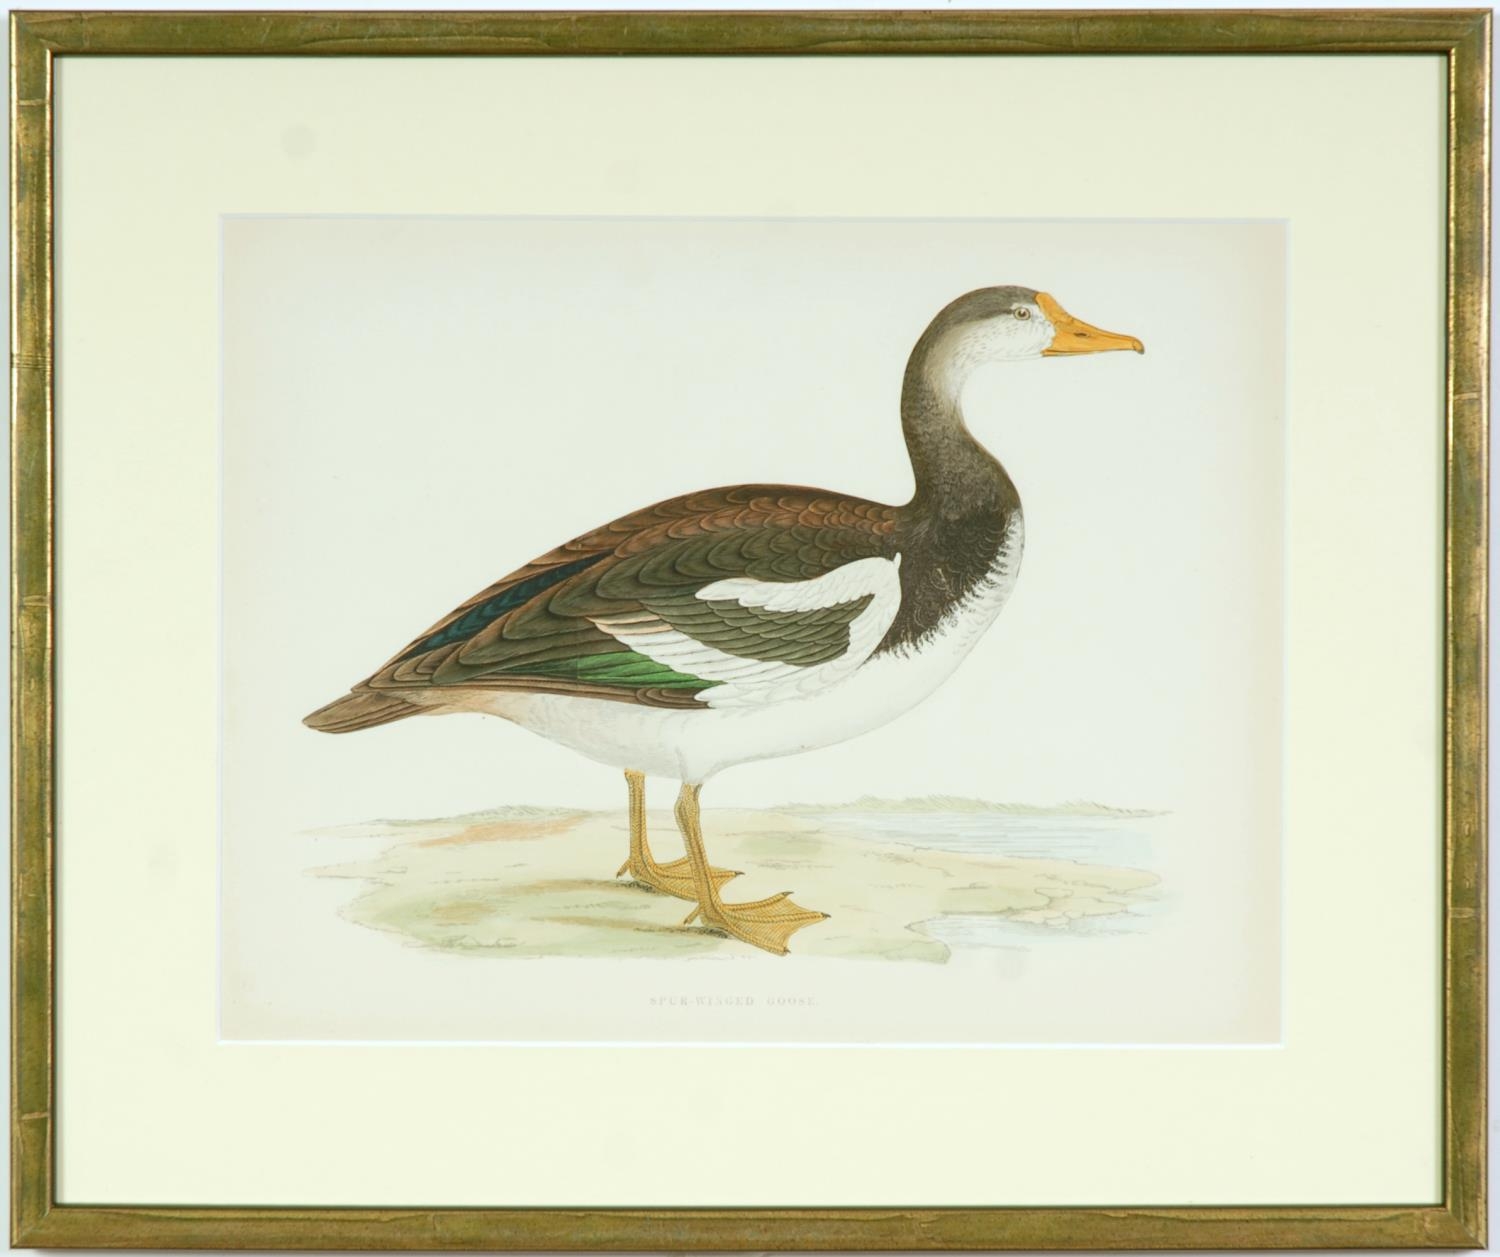 A SET OF FOUR BRITISH GAME BIRDS, swans and geese, handcoloured lithographic plates 1891, Ref: - Image 5 of 5